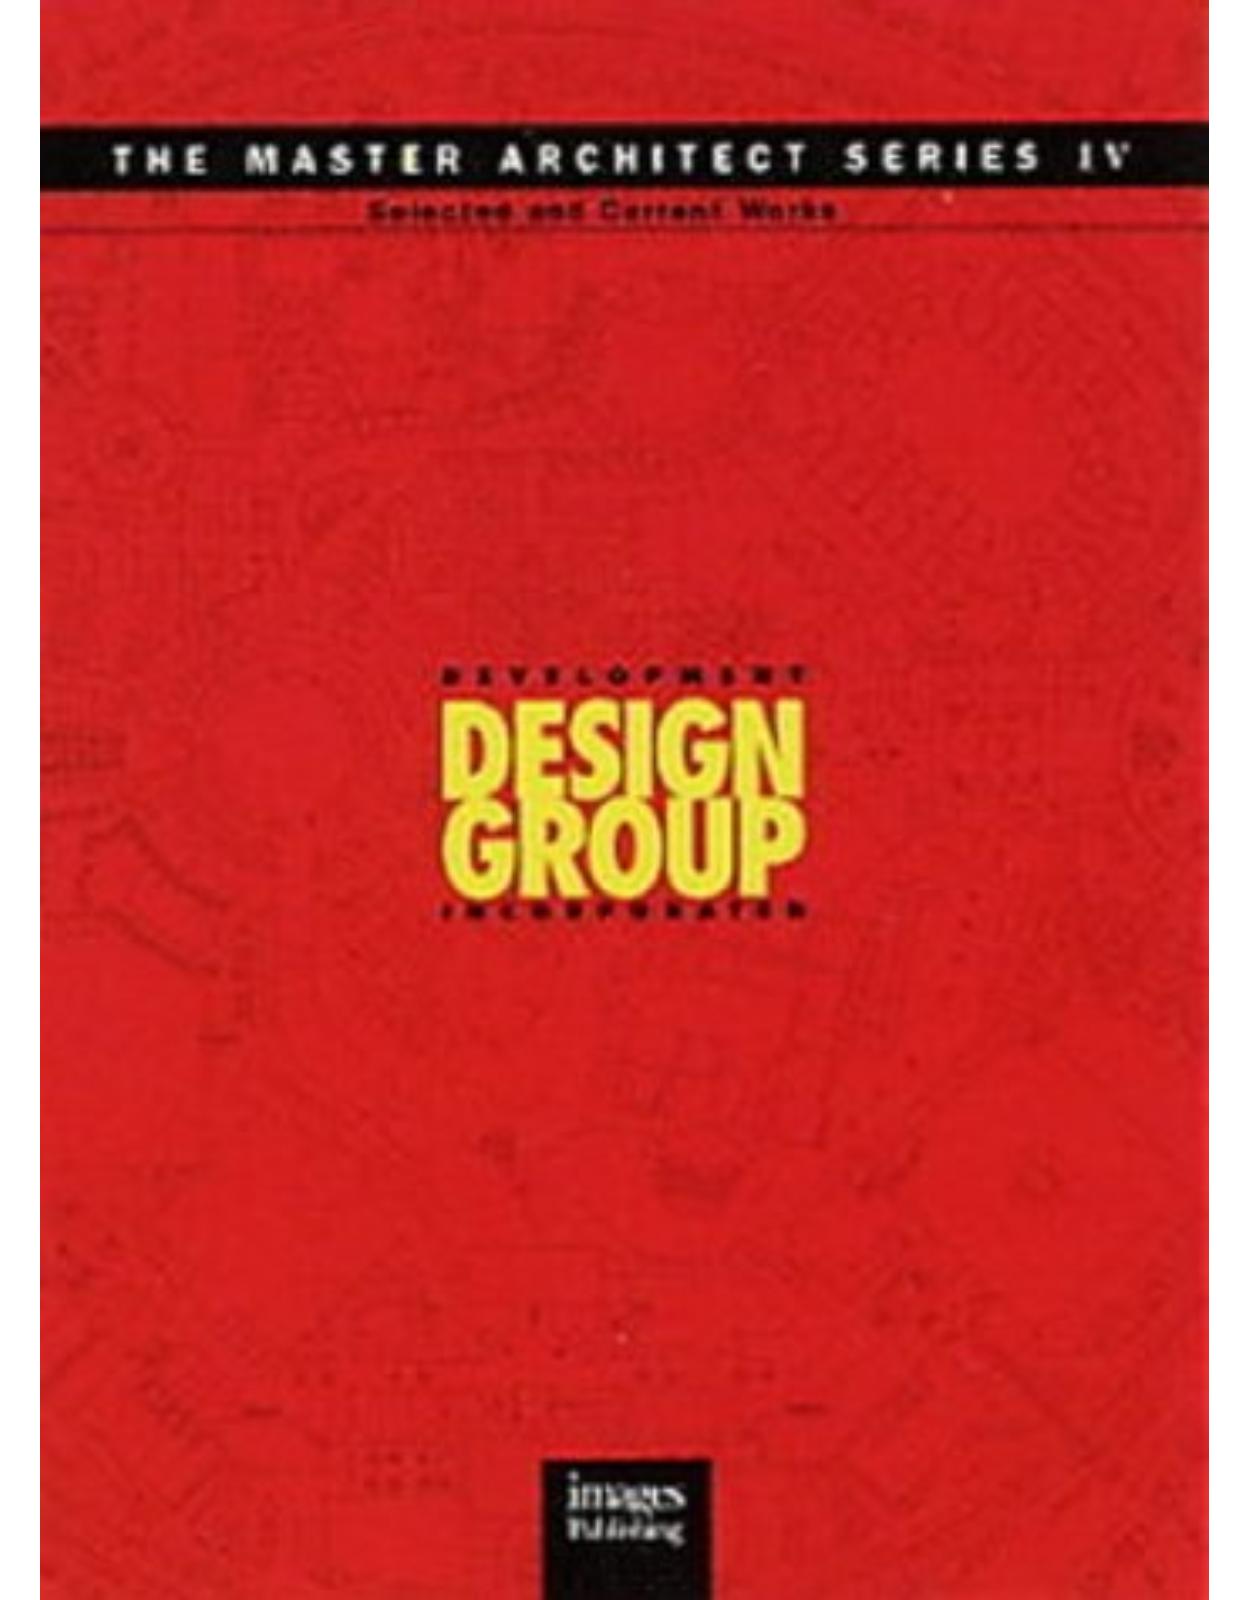 Development Design Group: Selected and Current Works (Master Architect Series IV)